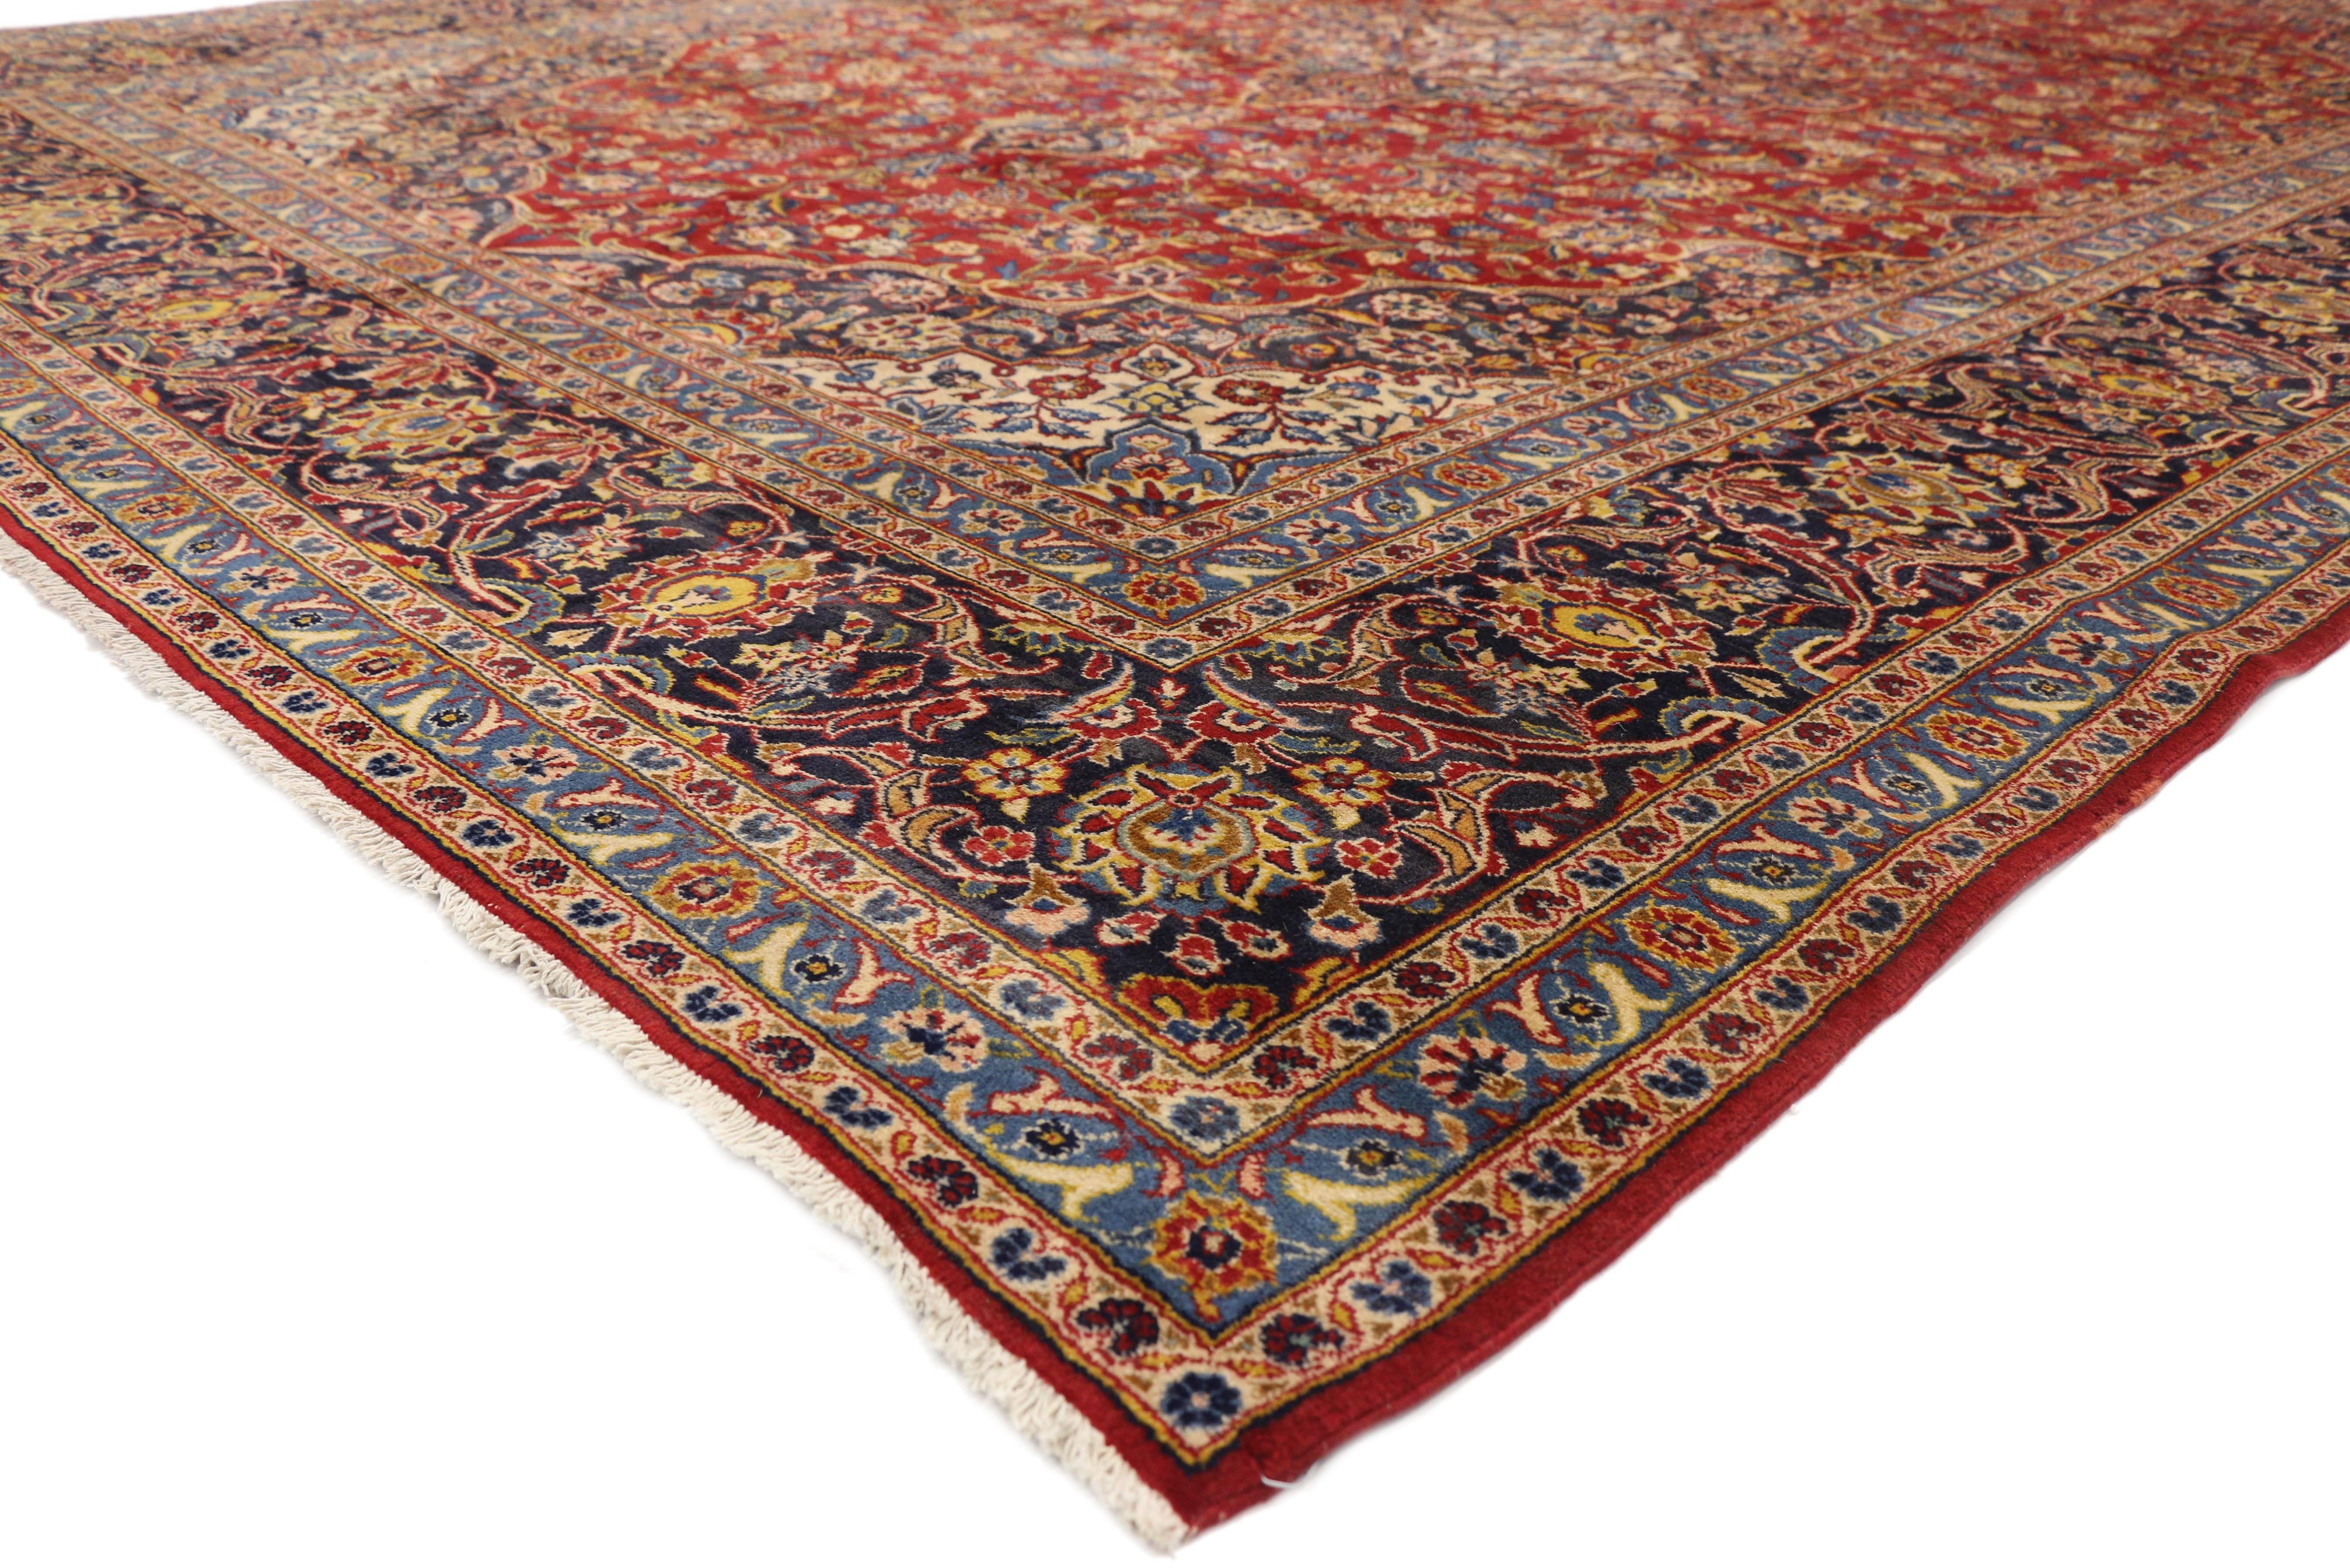 76311, vintage Persian Kashan Area rug with neoclassical style. Featuring a standard Kashan medallion of stepped and lobed attributes, this hand knotted wool vintage Persian Kashan rug is ornamented by elongated palmette-shaped pendants and